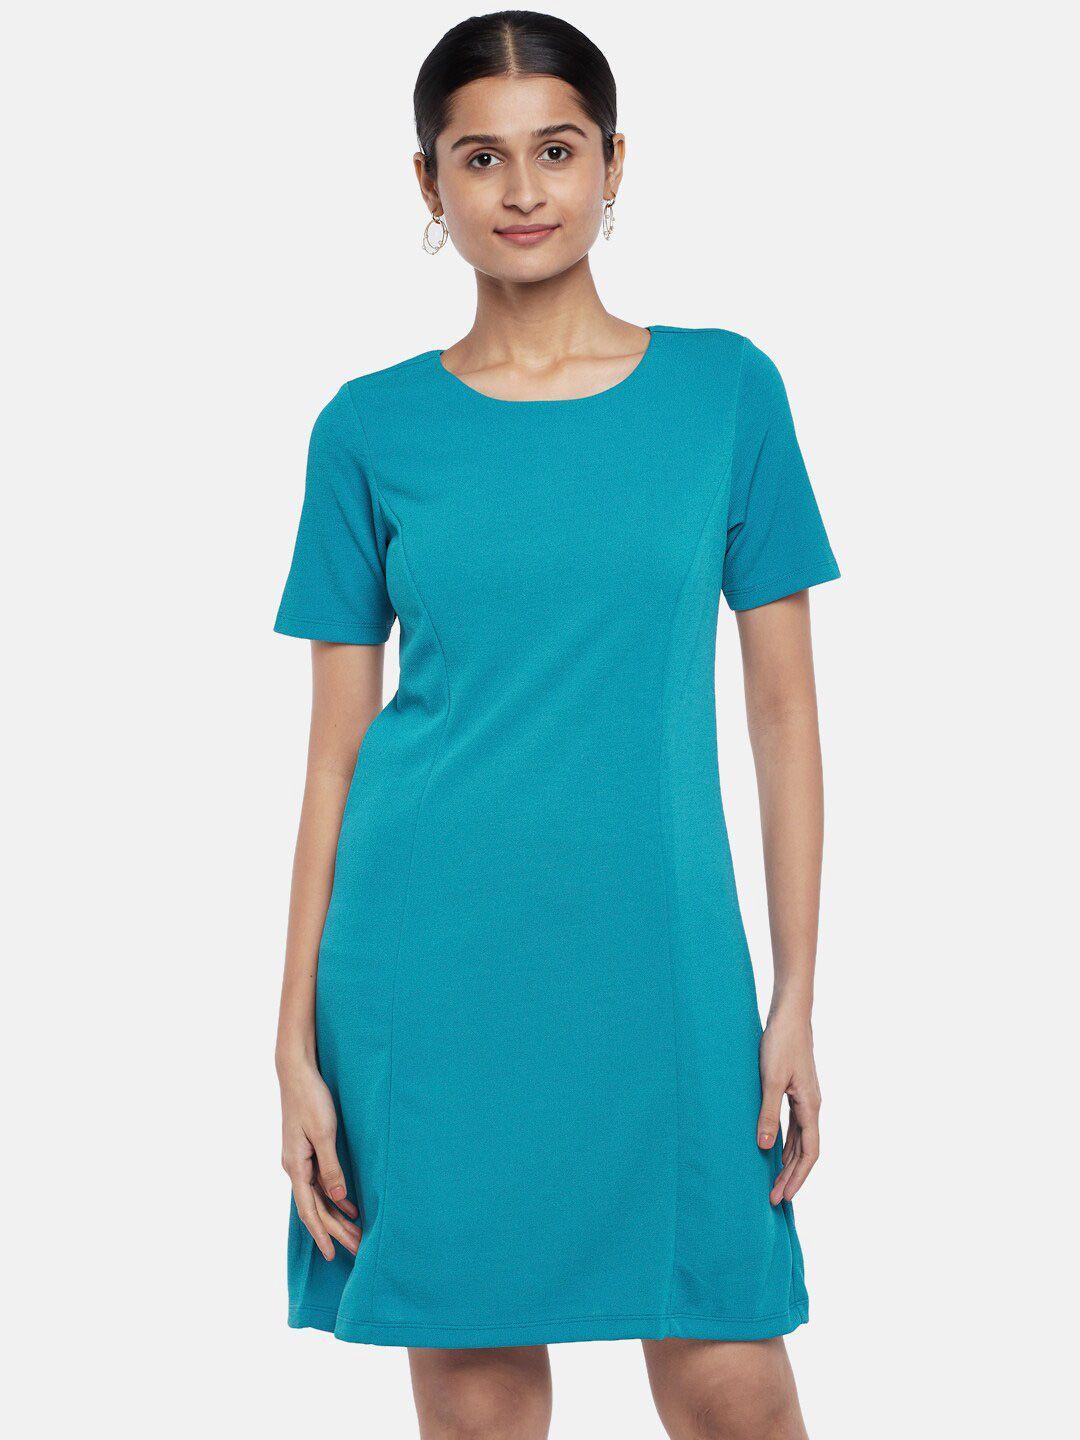 annabelle by pantaloons blue solid t-shirt dress